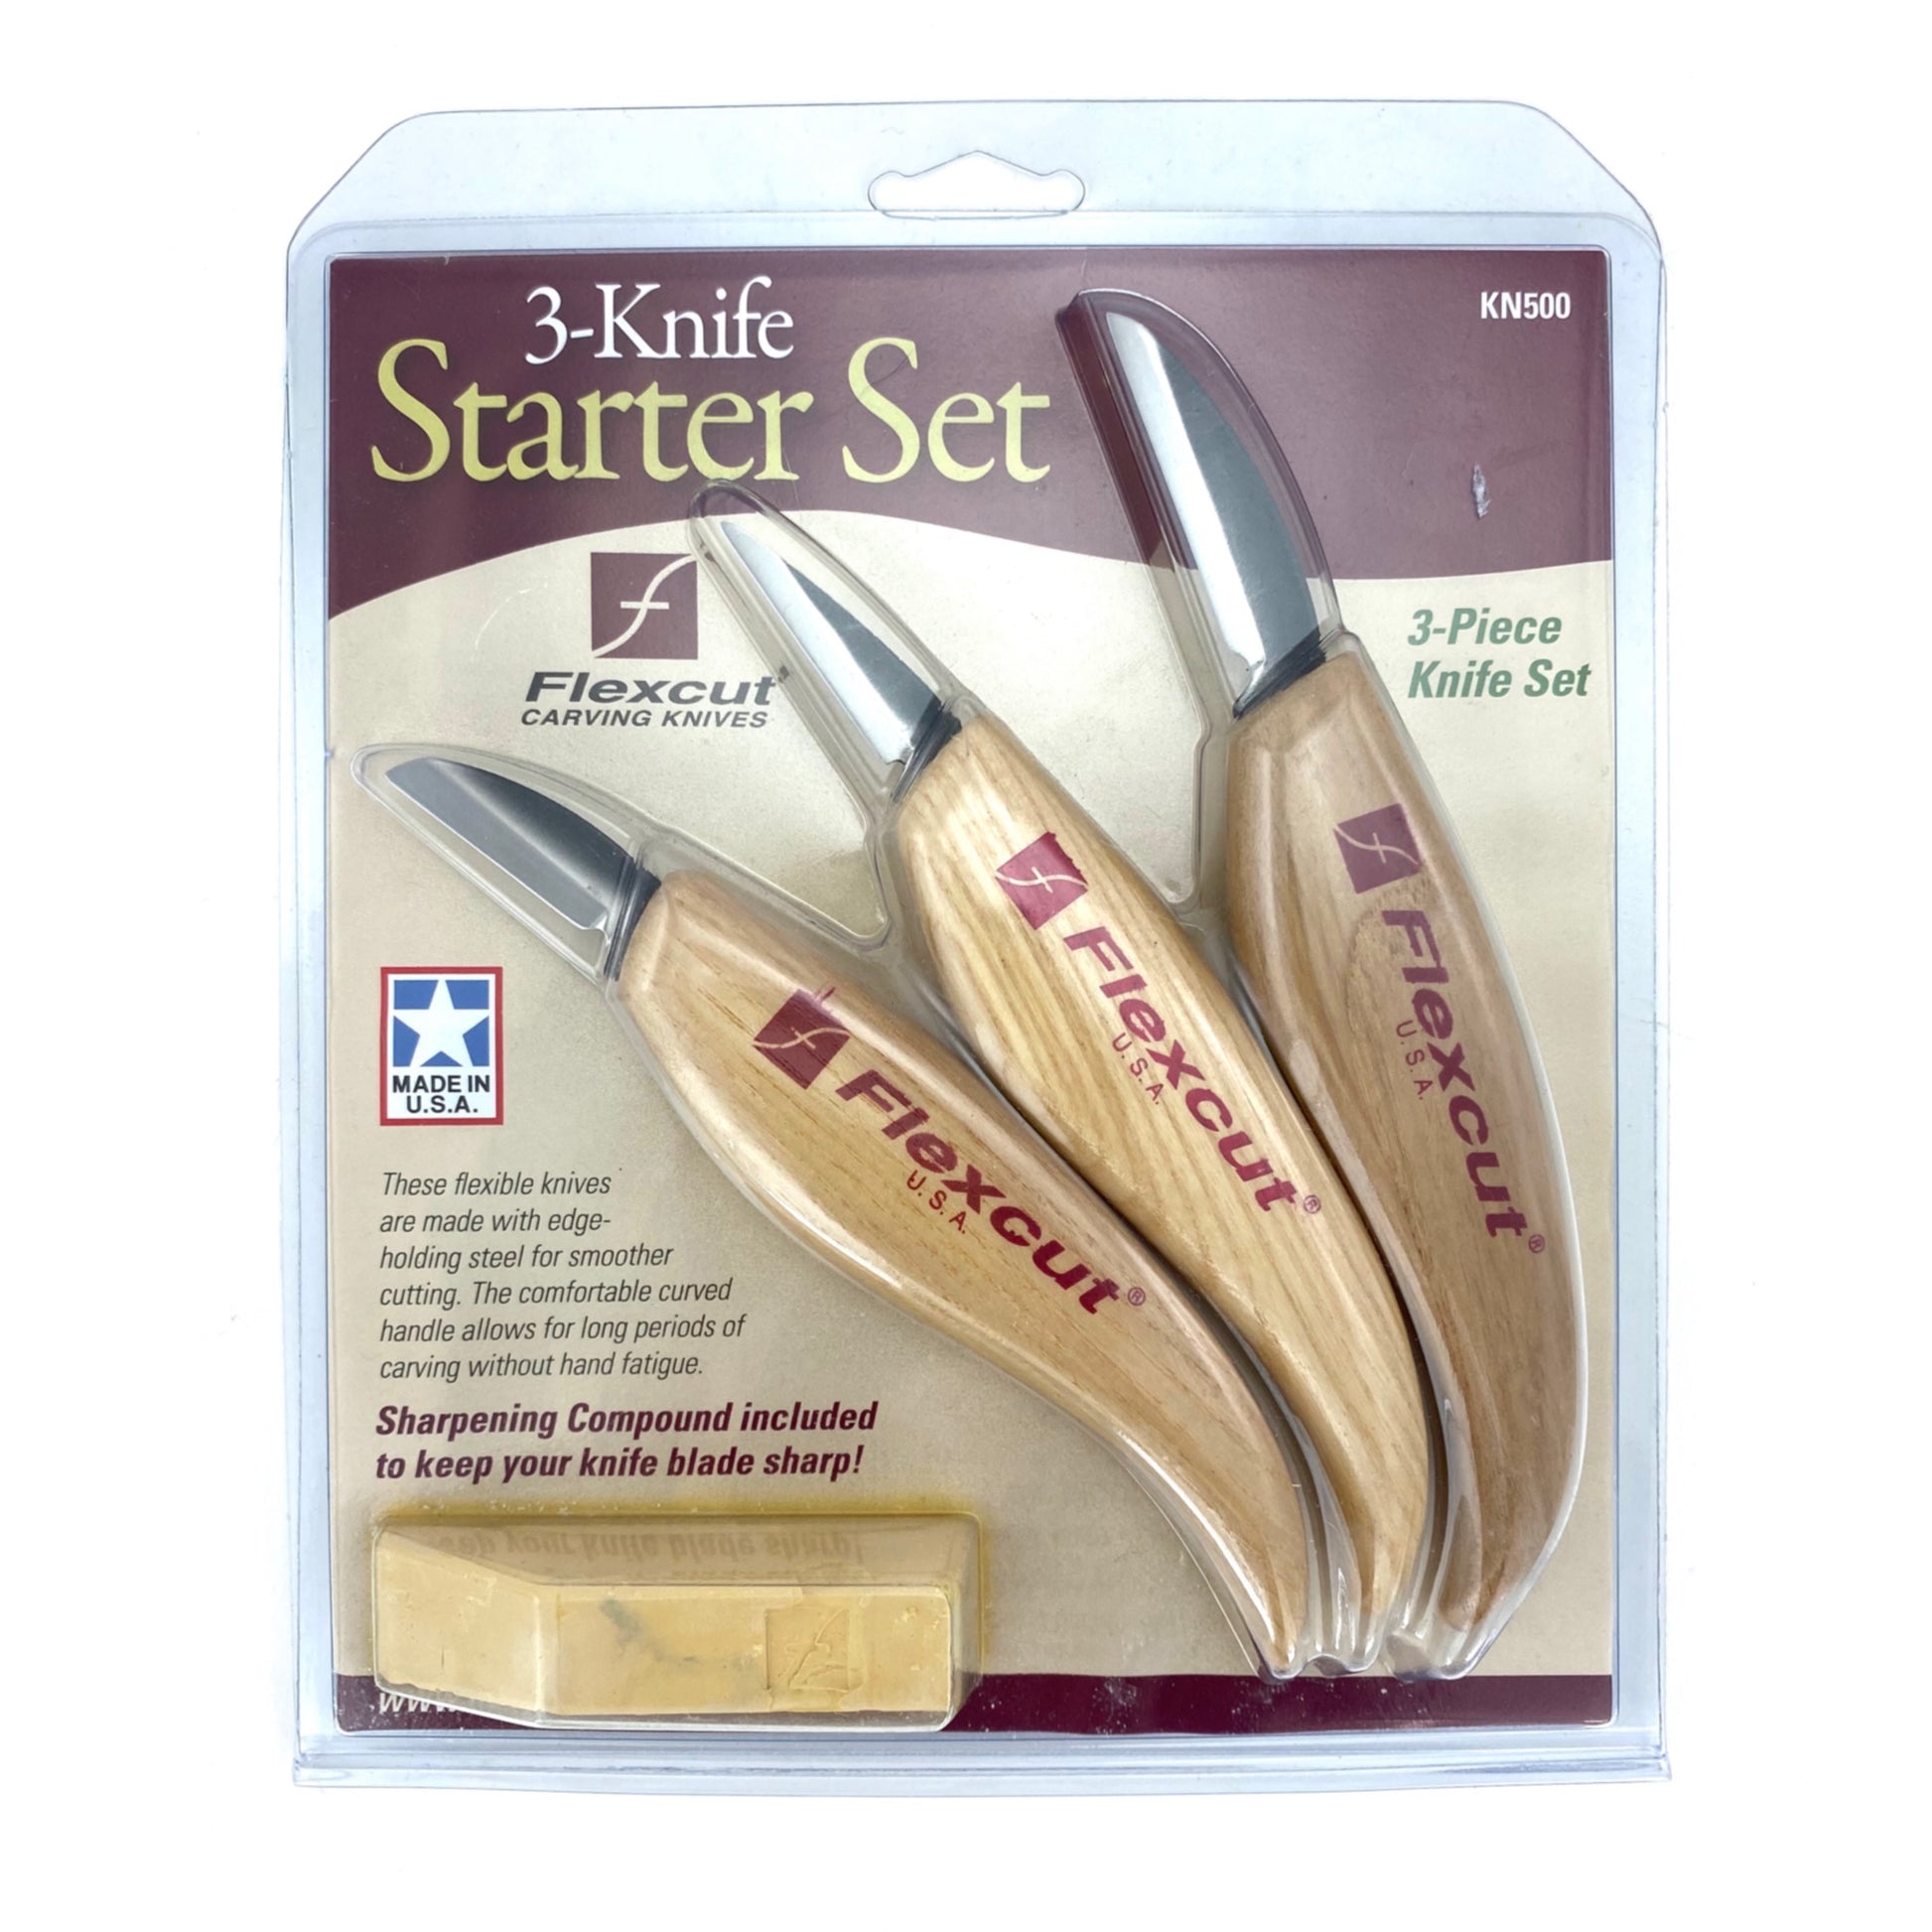 Wood Carving Knives Tools, Wood Carving Knife Tool Set